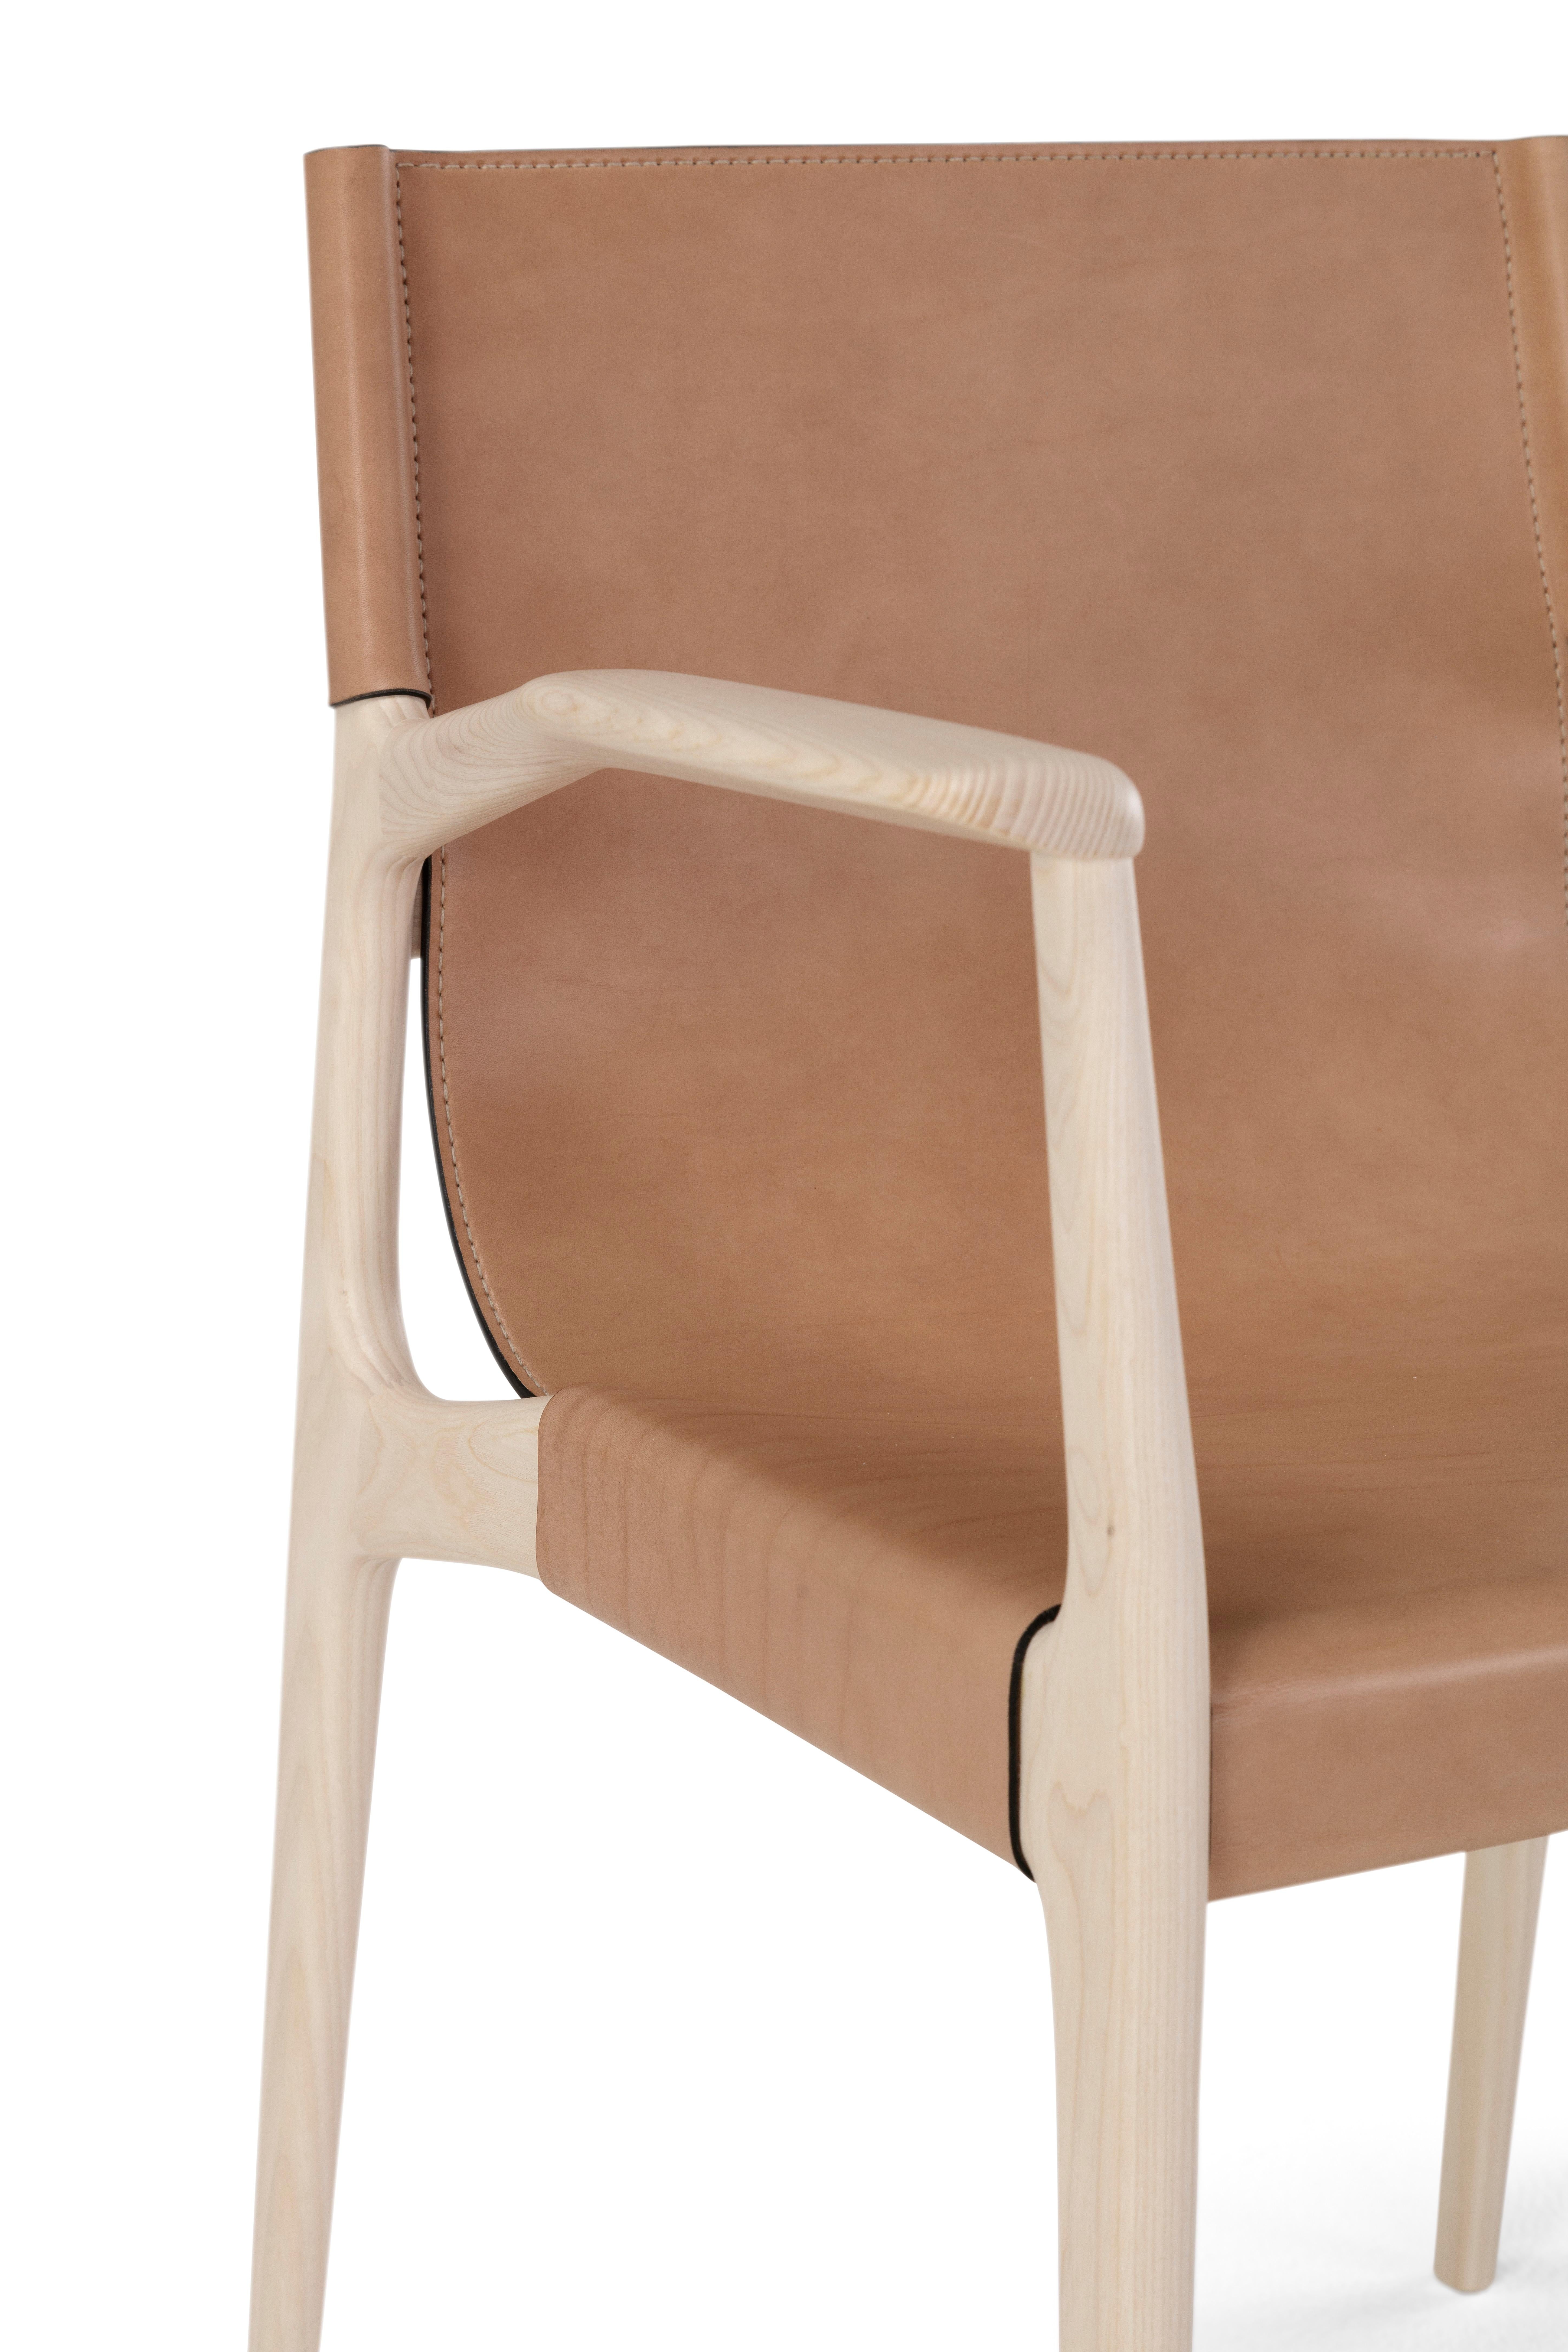 Tessa Chair with Arms In New Condition For Sale In GRUMO APPULA (BA), IT